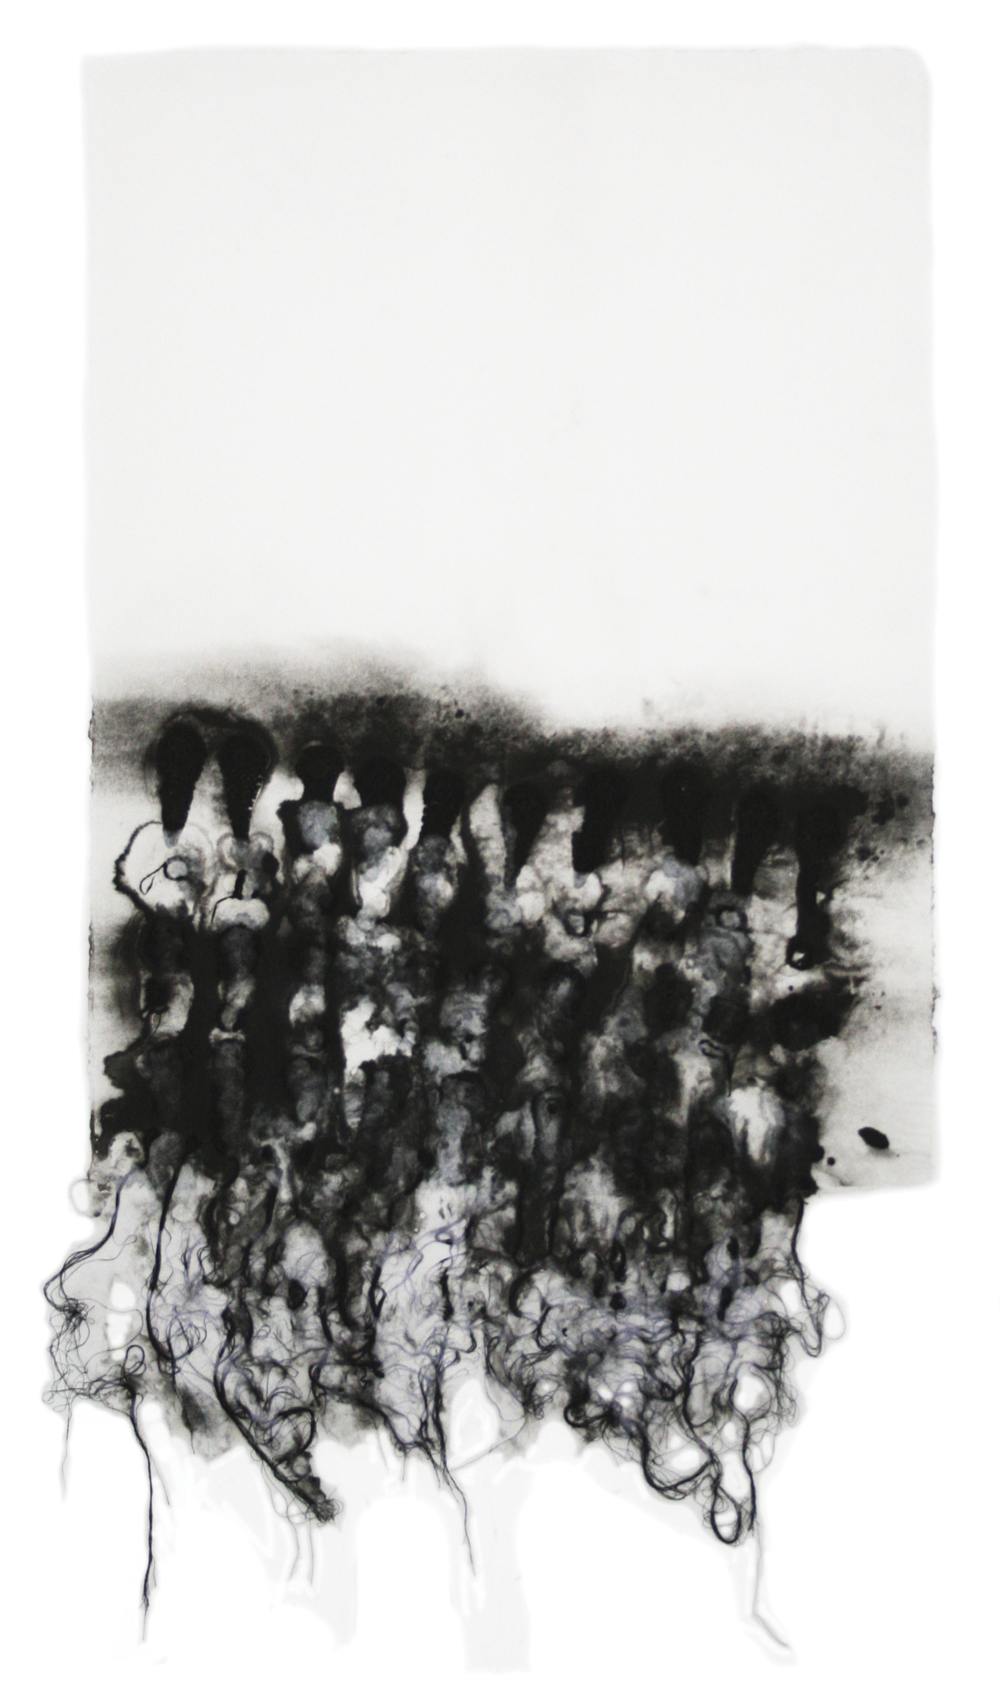 An abstract work containing black fibers on a white ground